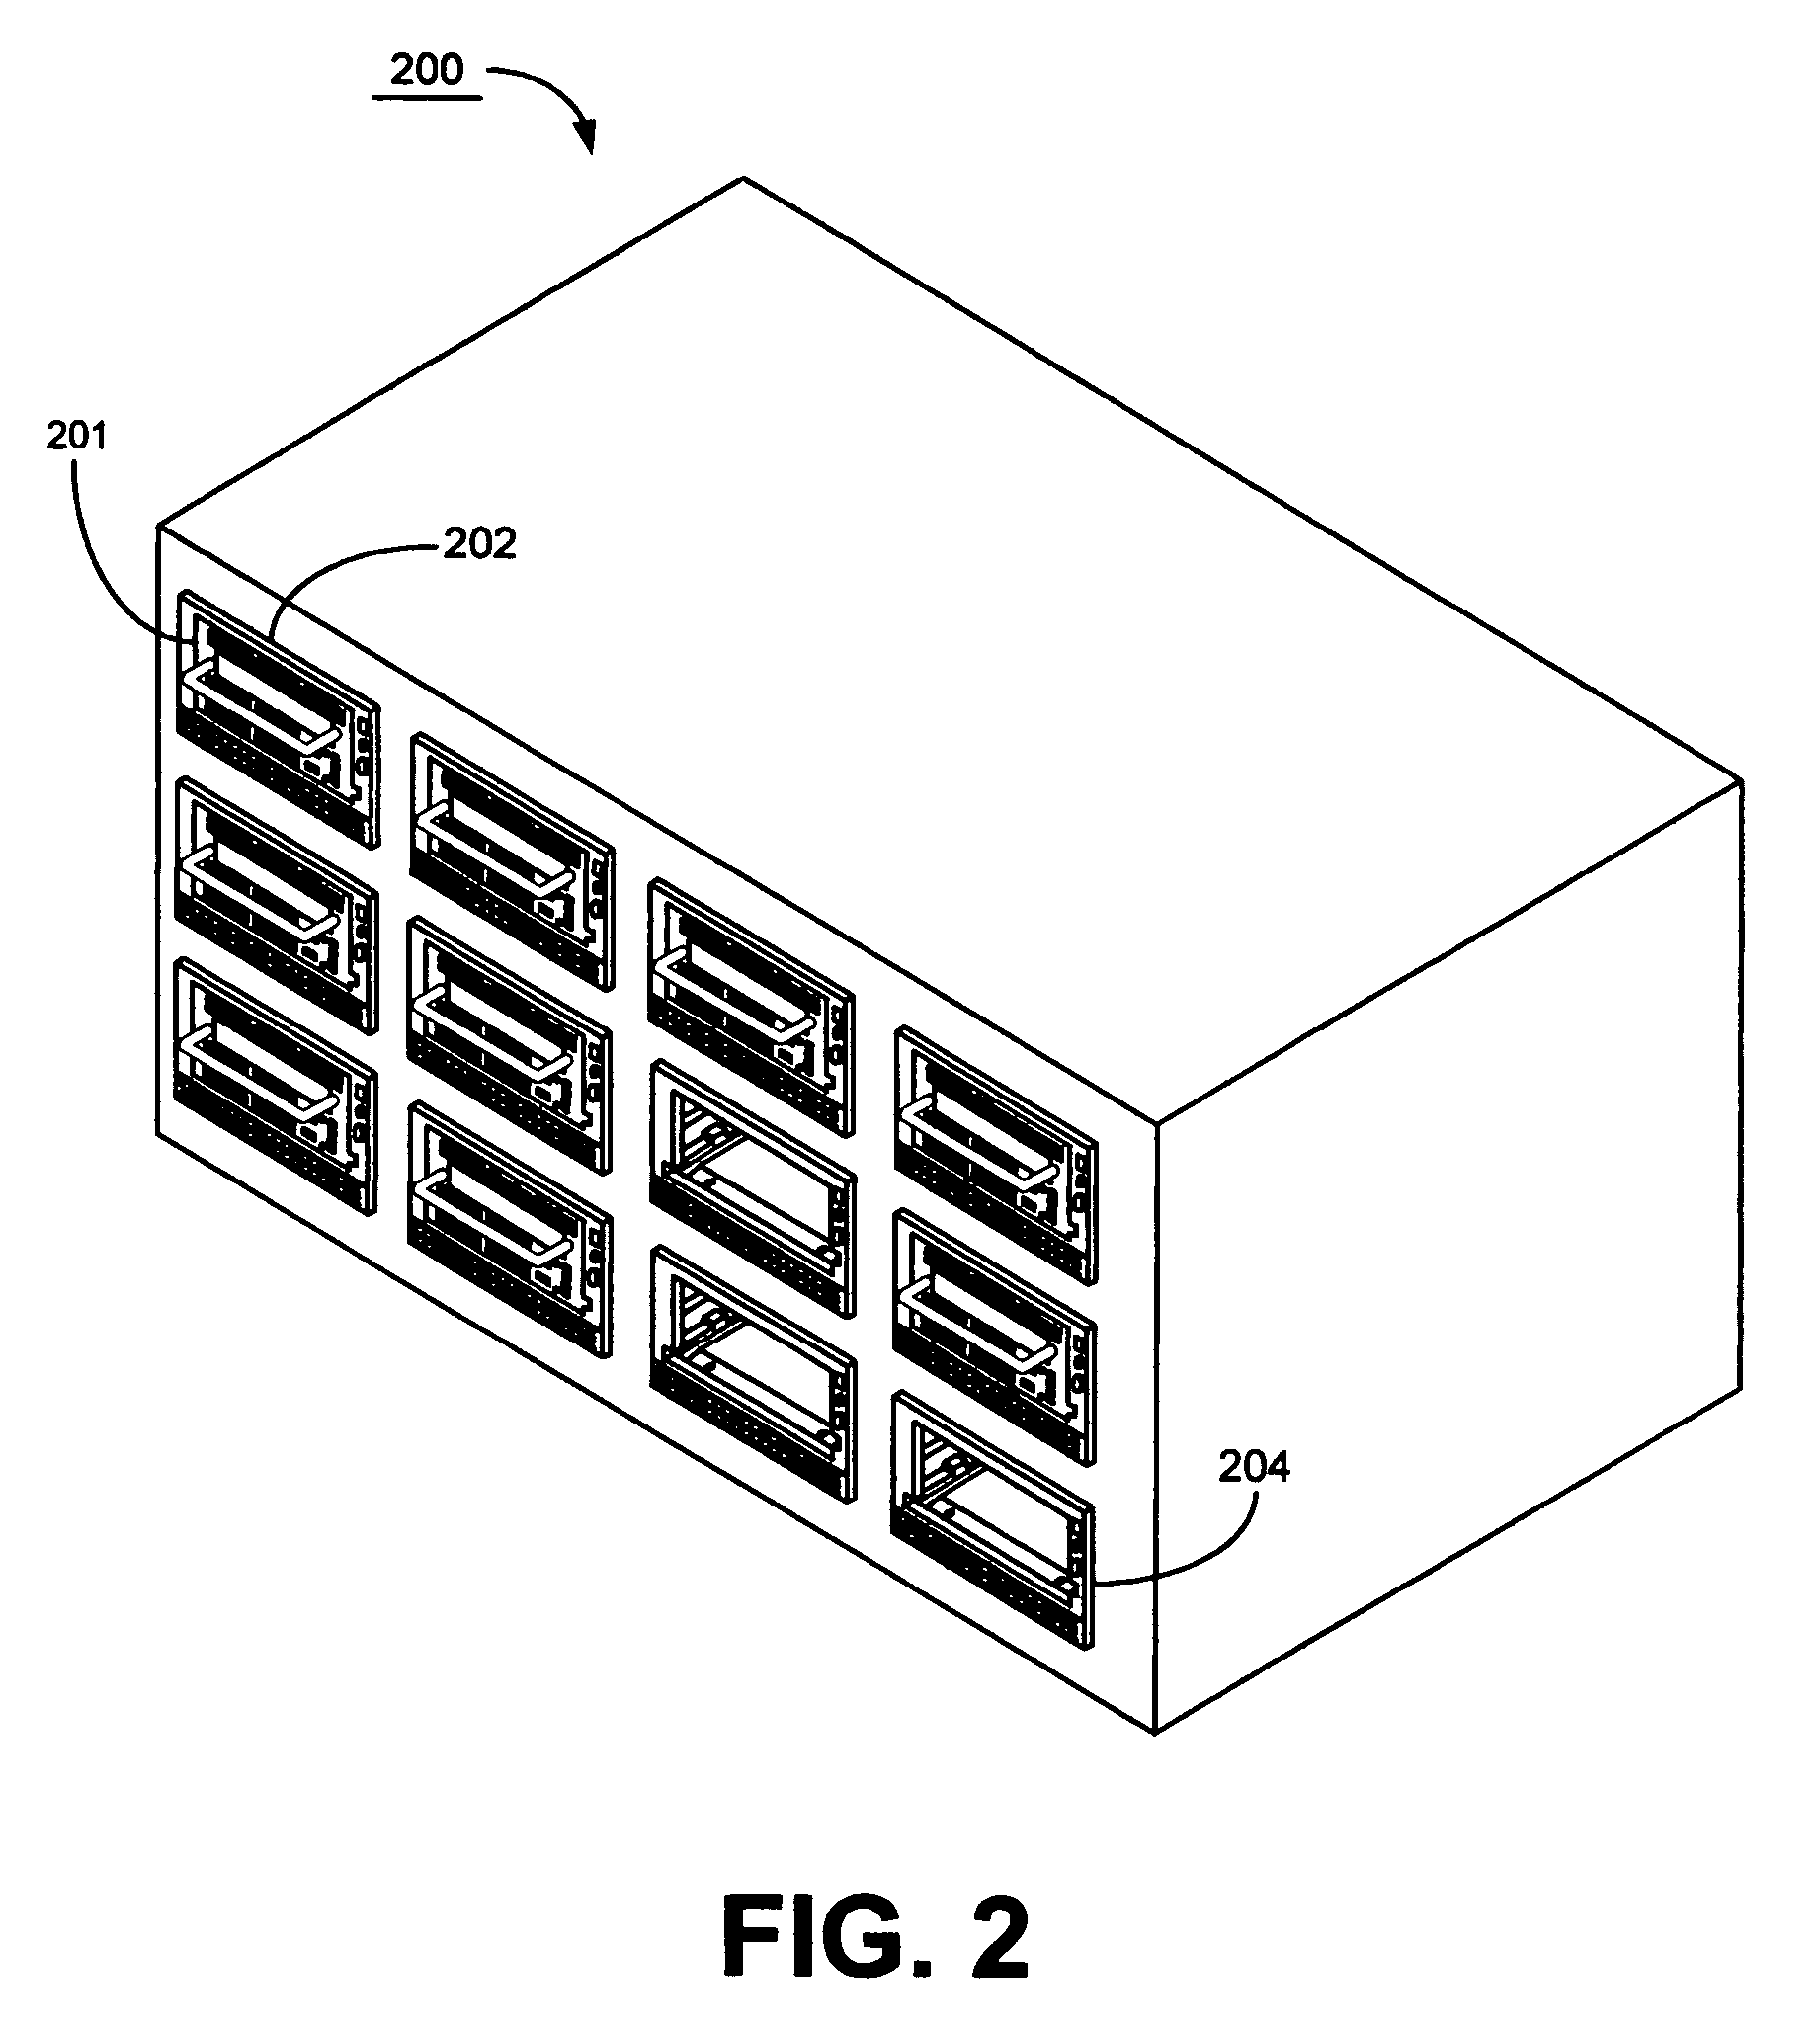 Random access storage system capable of performing storage operations intended for alternative storage devices